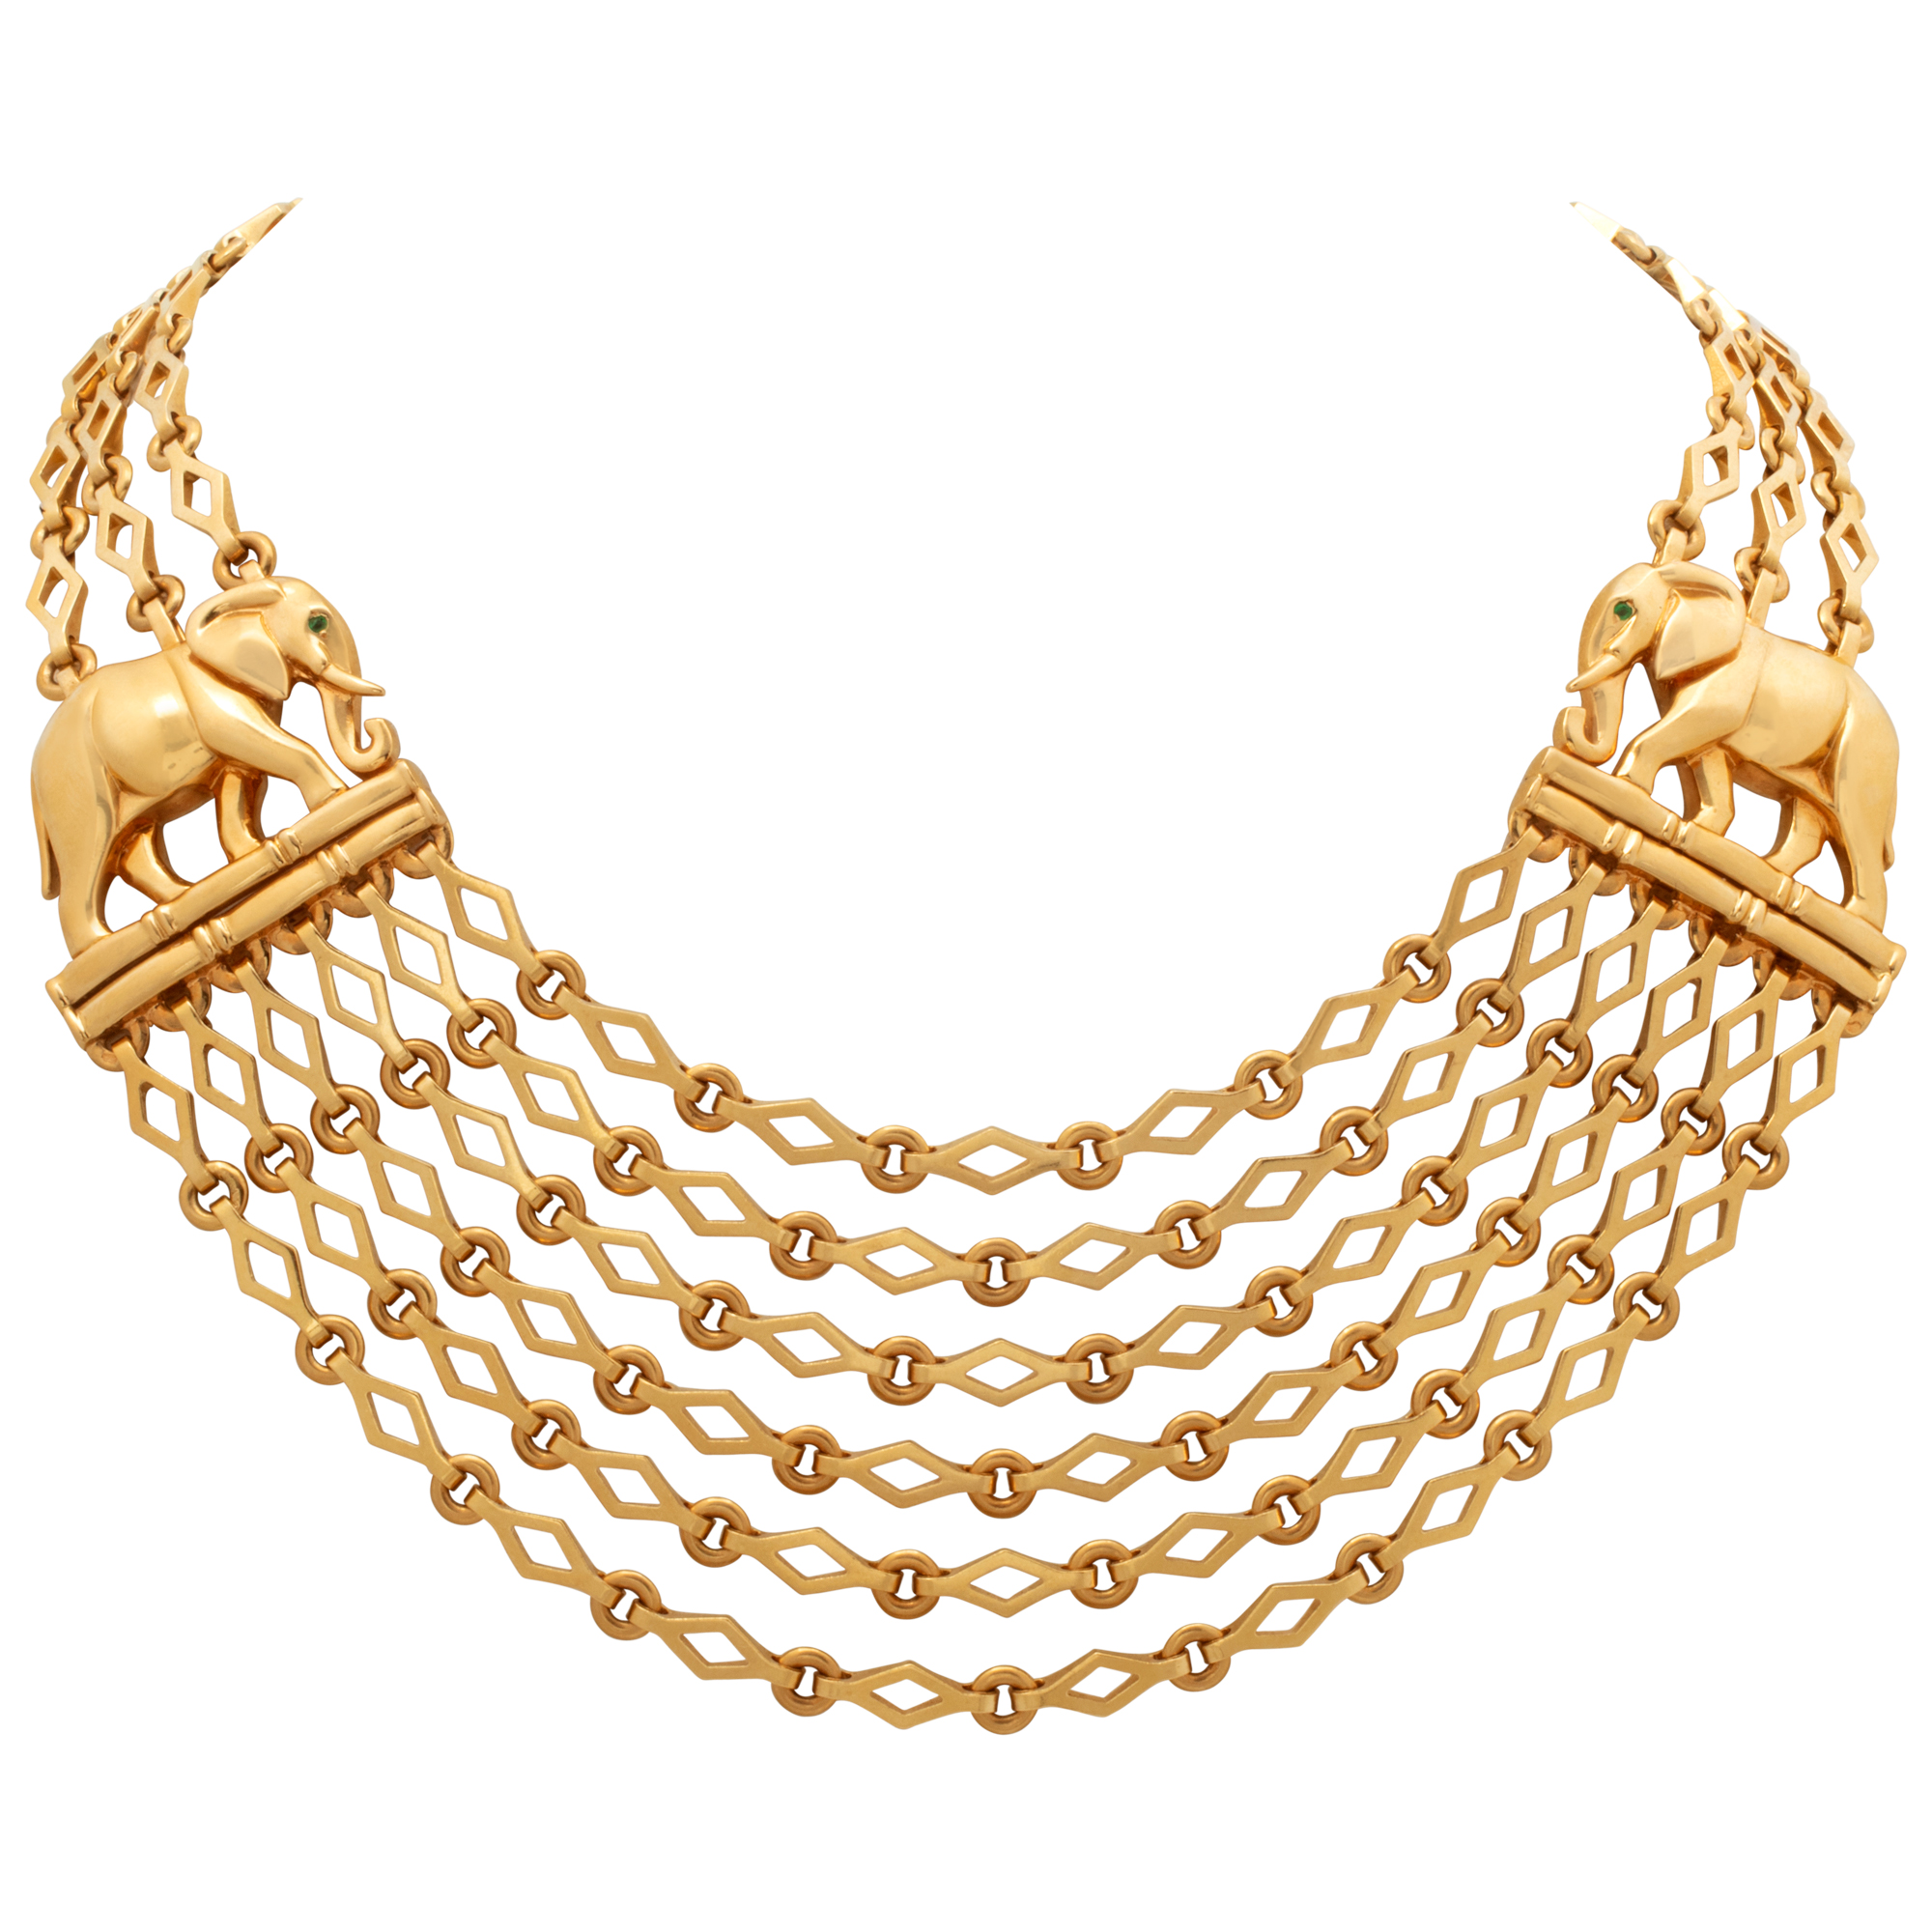 Circa 1970's,  Cartier necklace from the 